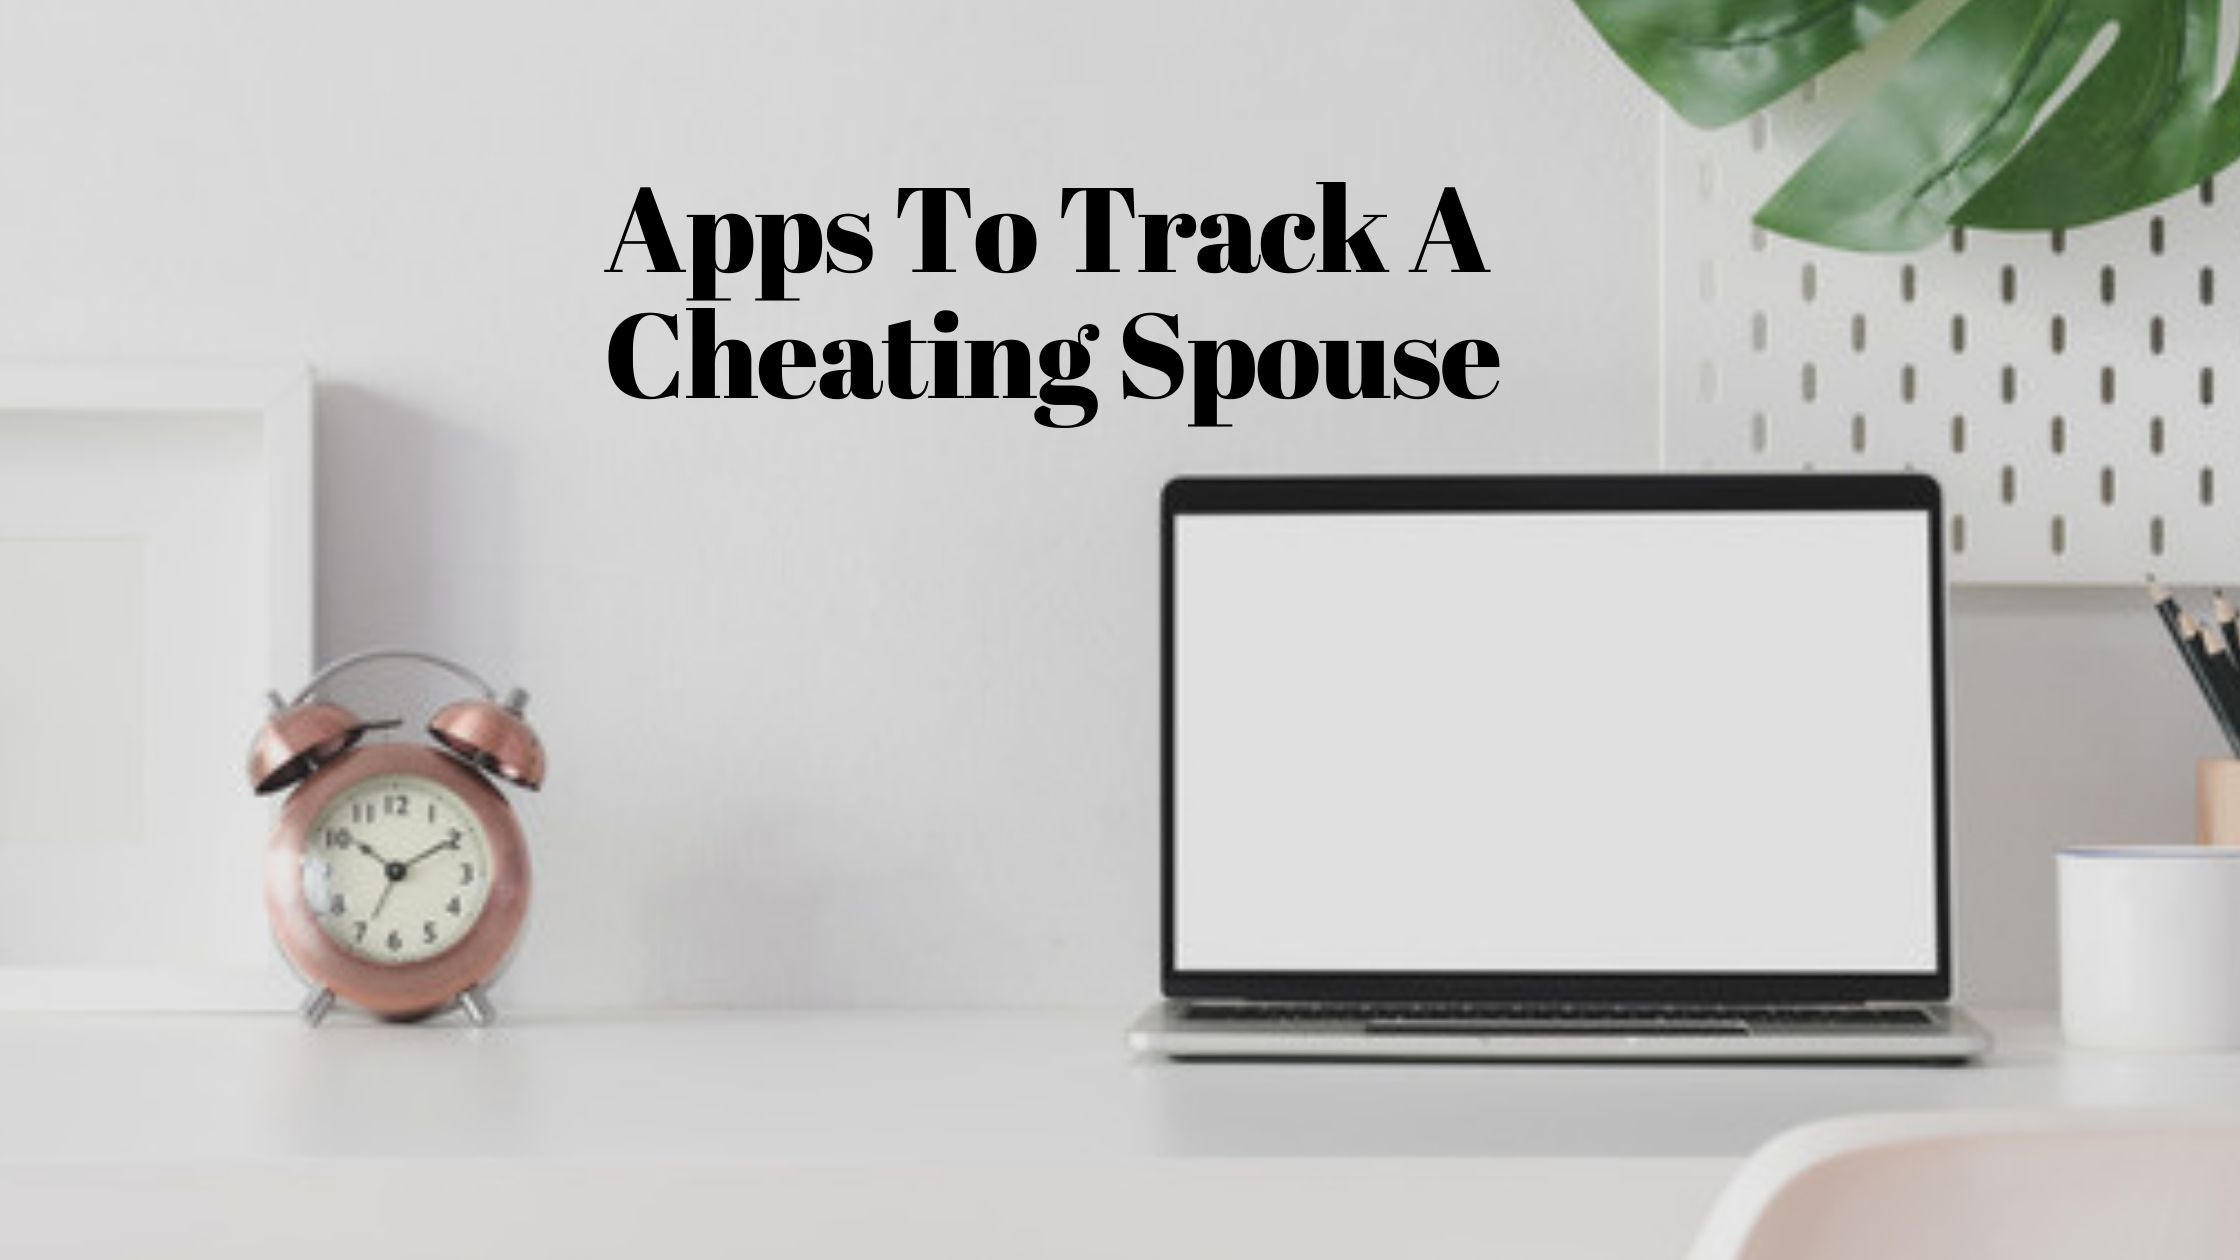 Track a cheating spouse